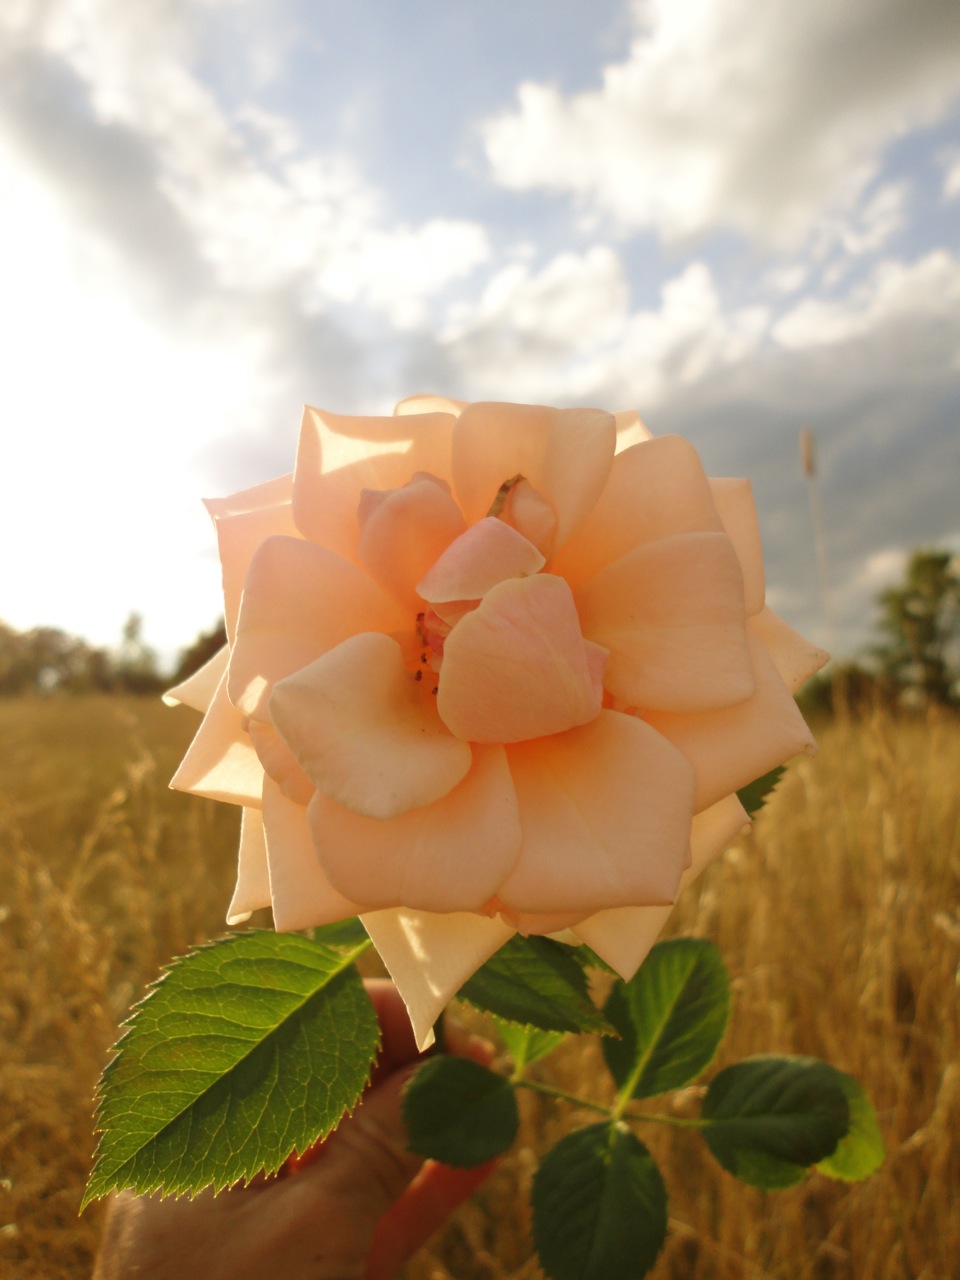 Fields And A Rose (user submitted)